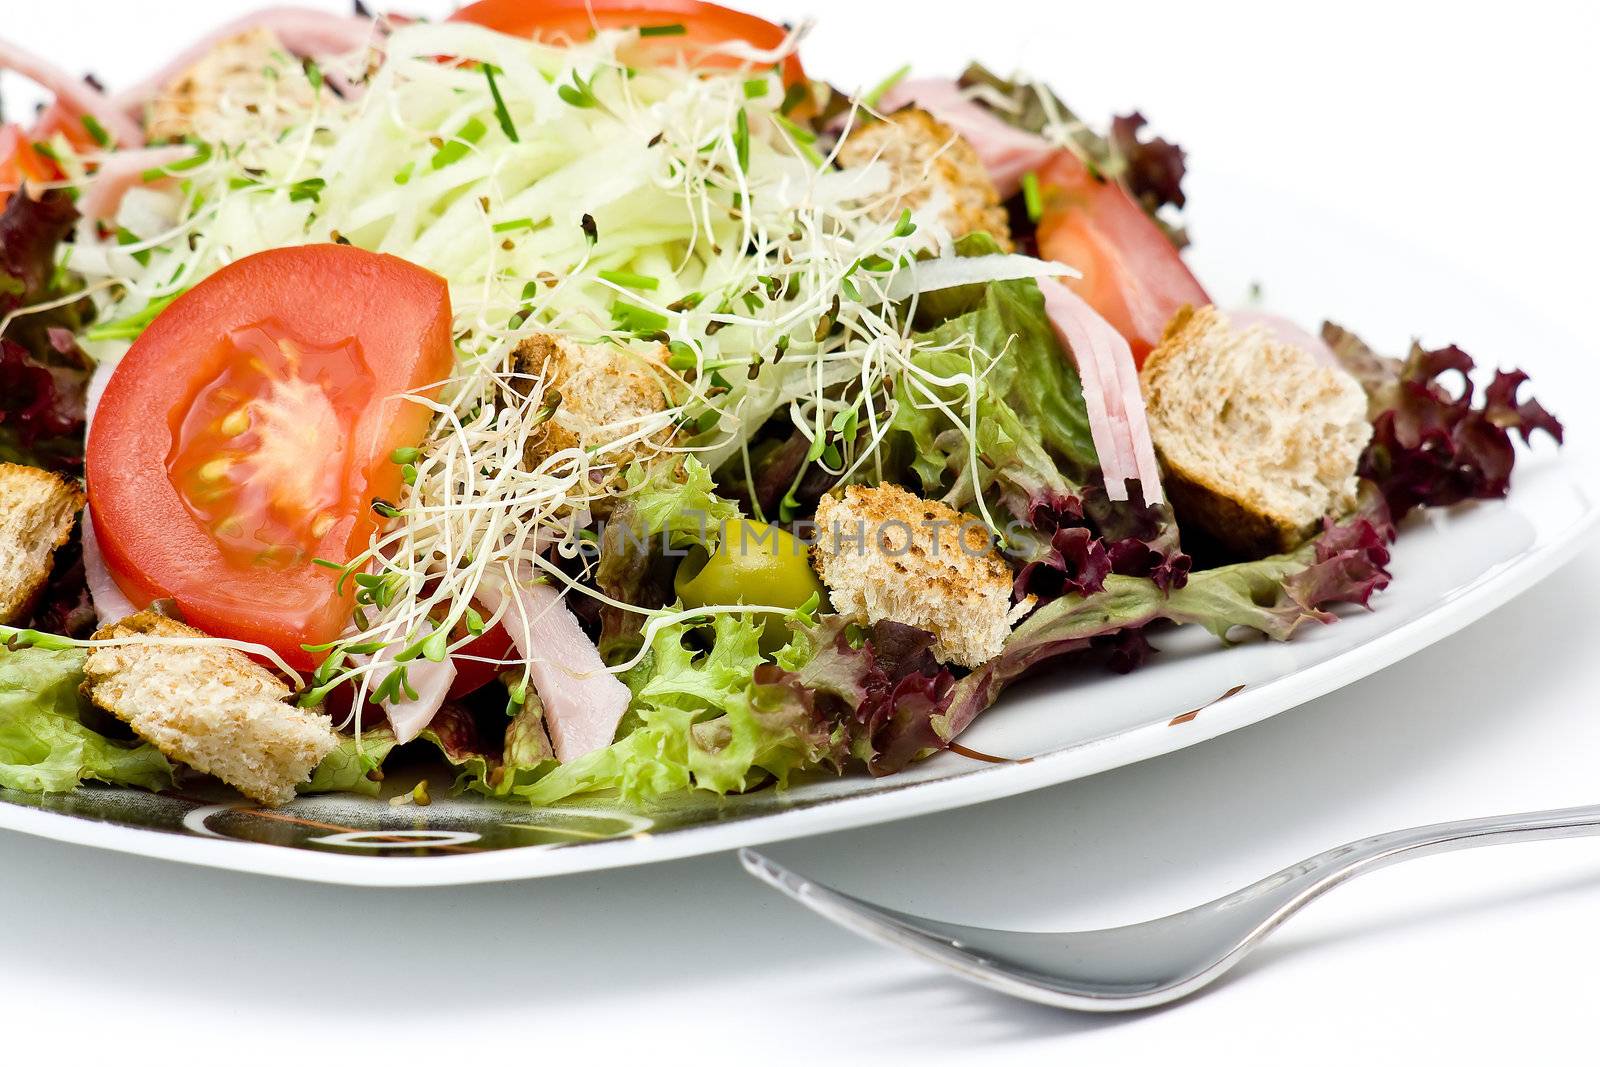 appetizing healthy salad on a plate by miradrozdowski